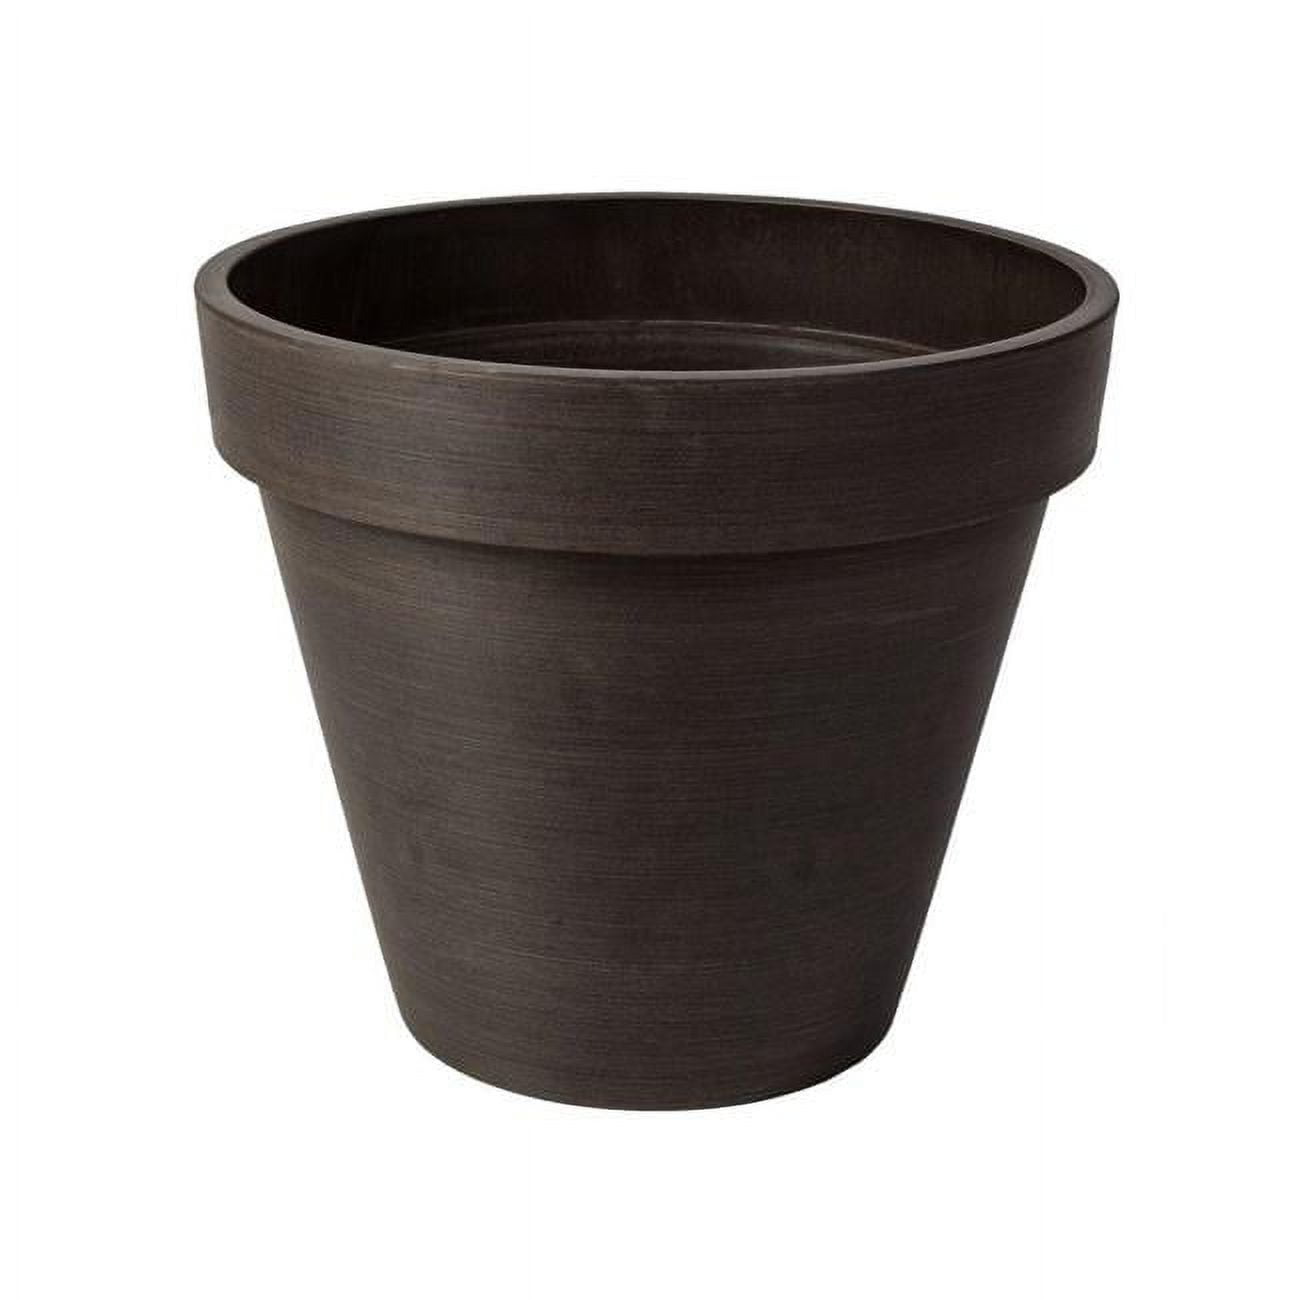 18135 12 X 14 X 14 In. Valencia Round Banded Planter Pot, Textured Brown